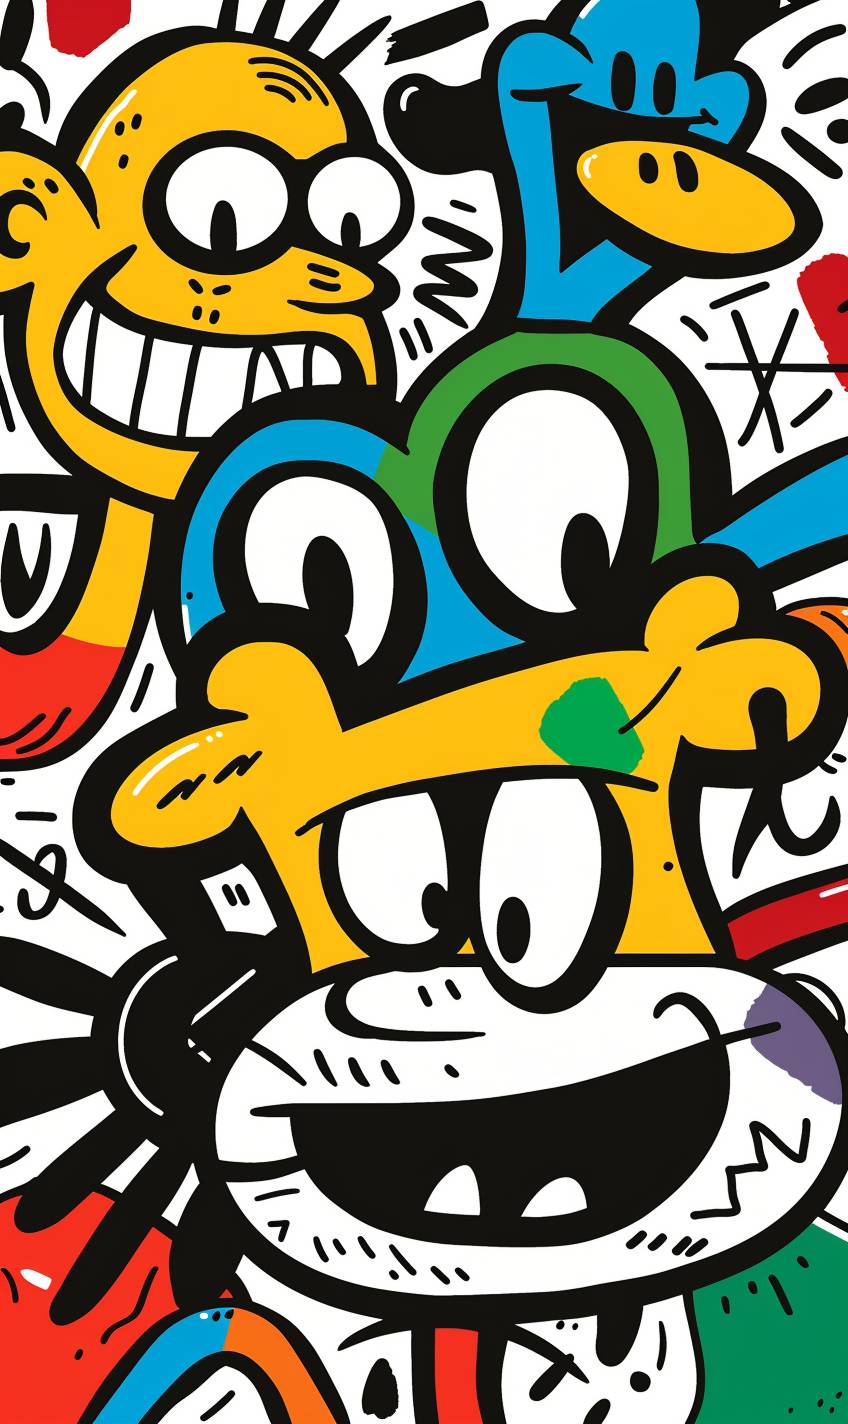 Abstract vector illustration of cartoon characters in the style of Keith Haring